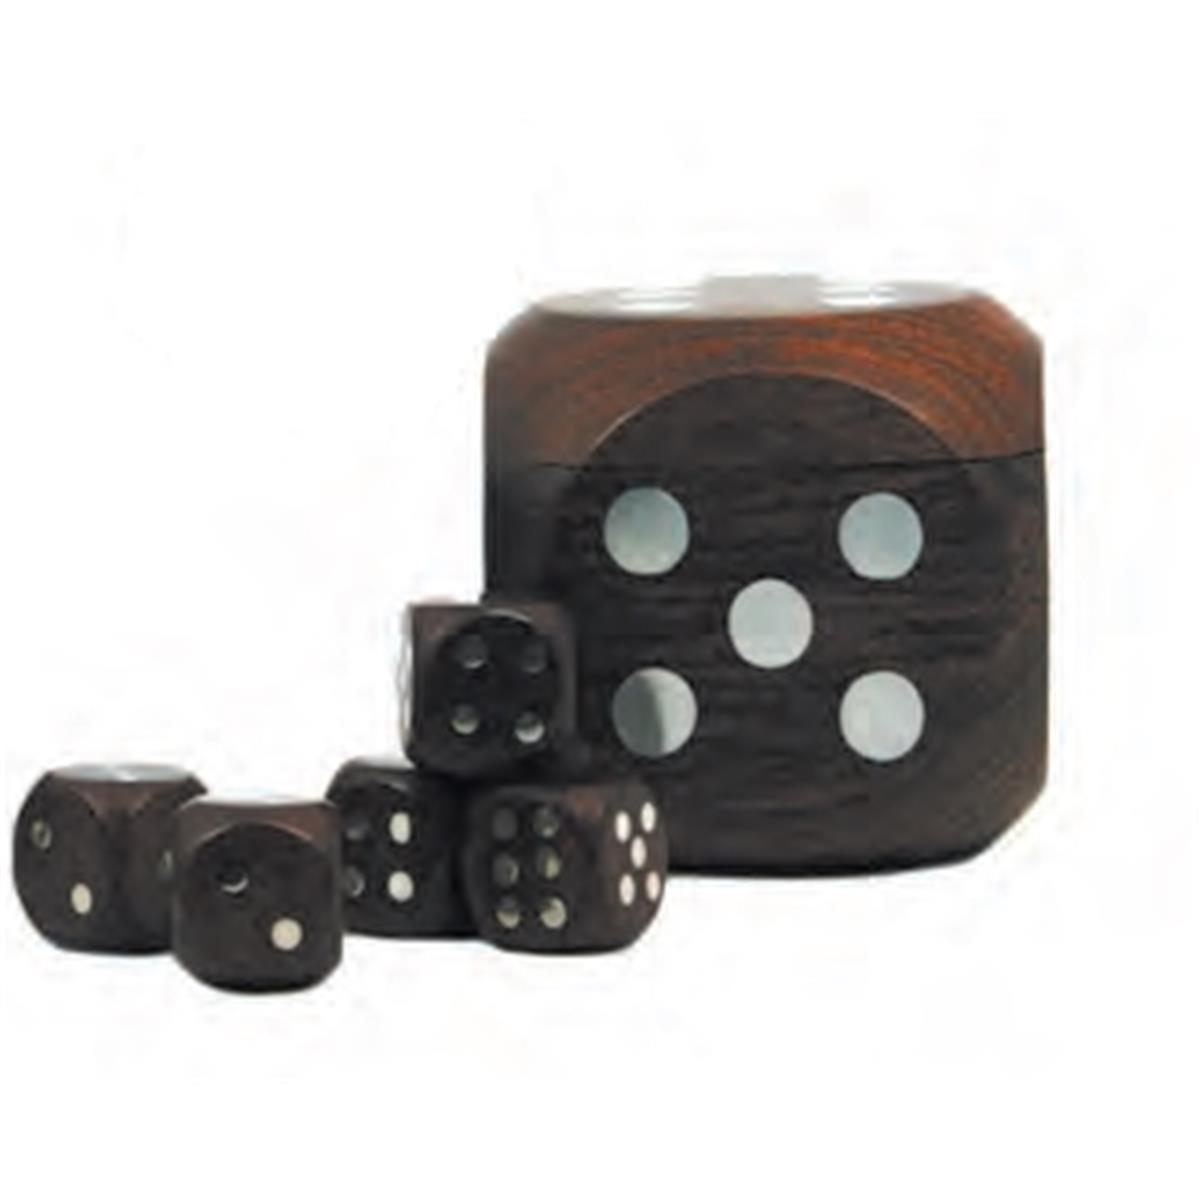 Gr031 Dice Box With 5 Dices, Silver